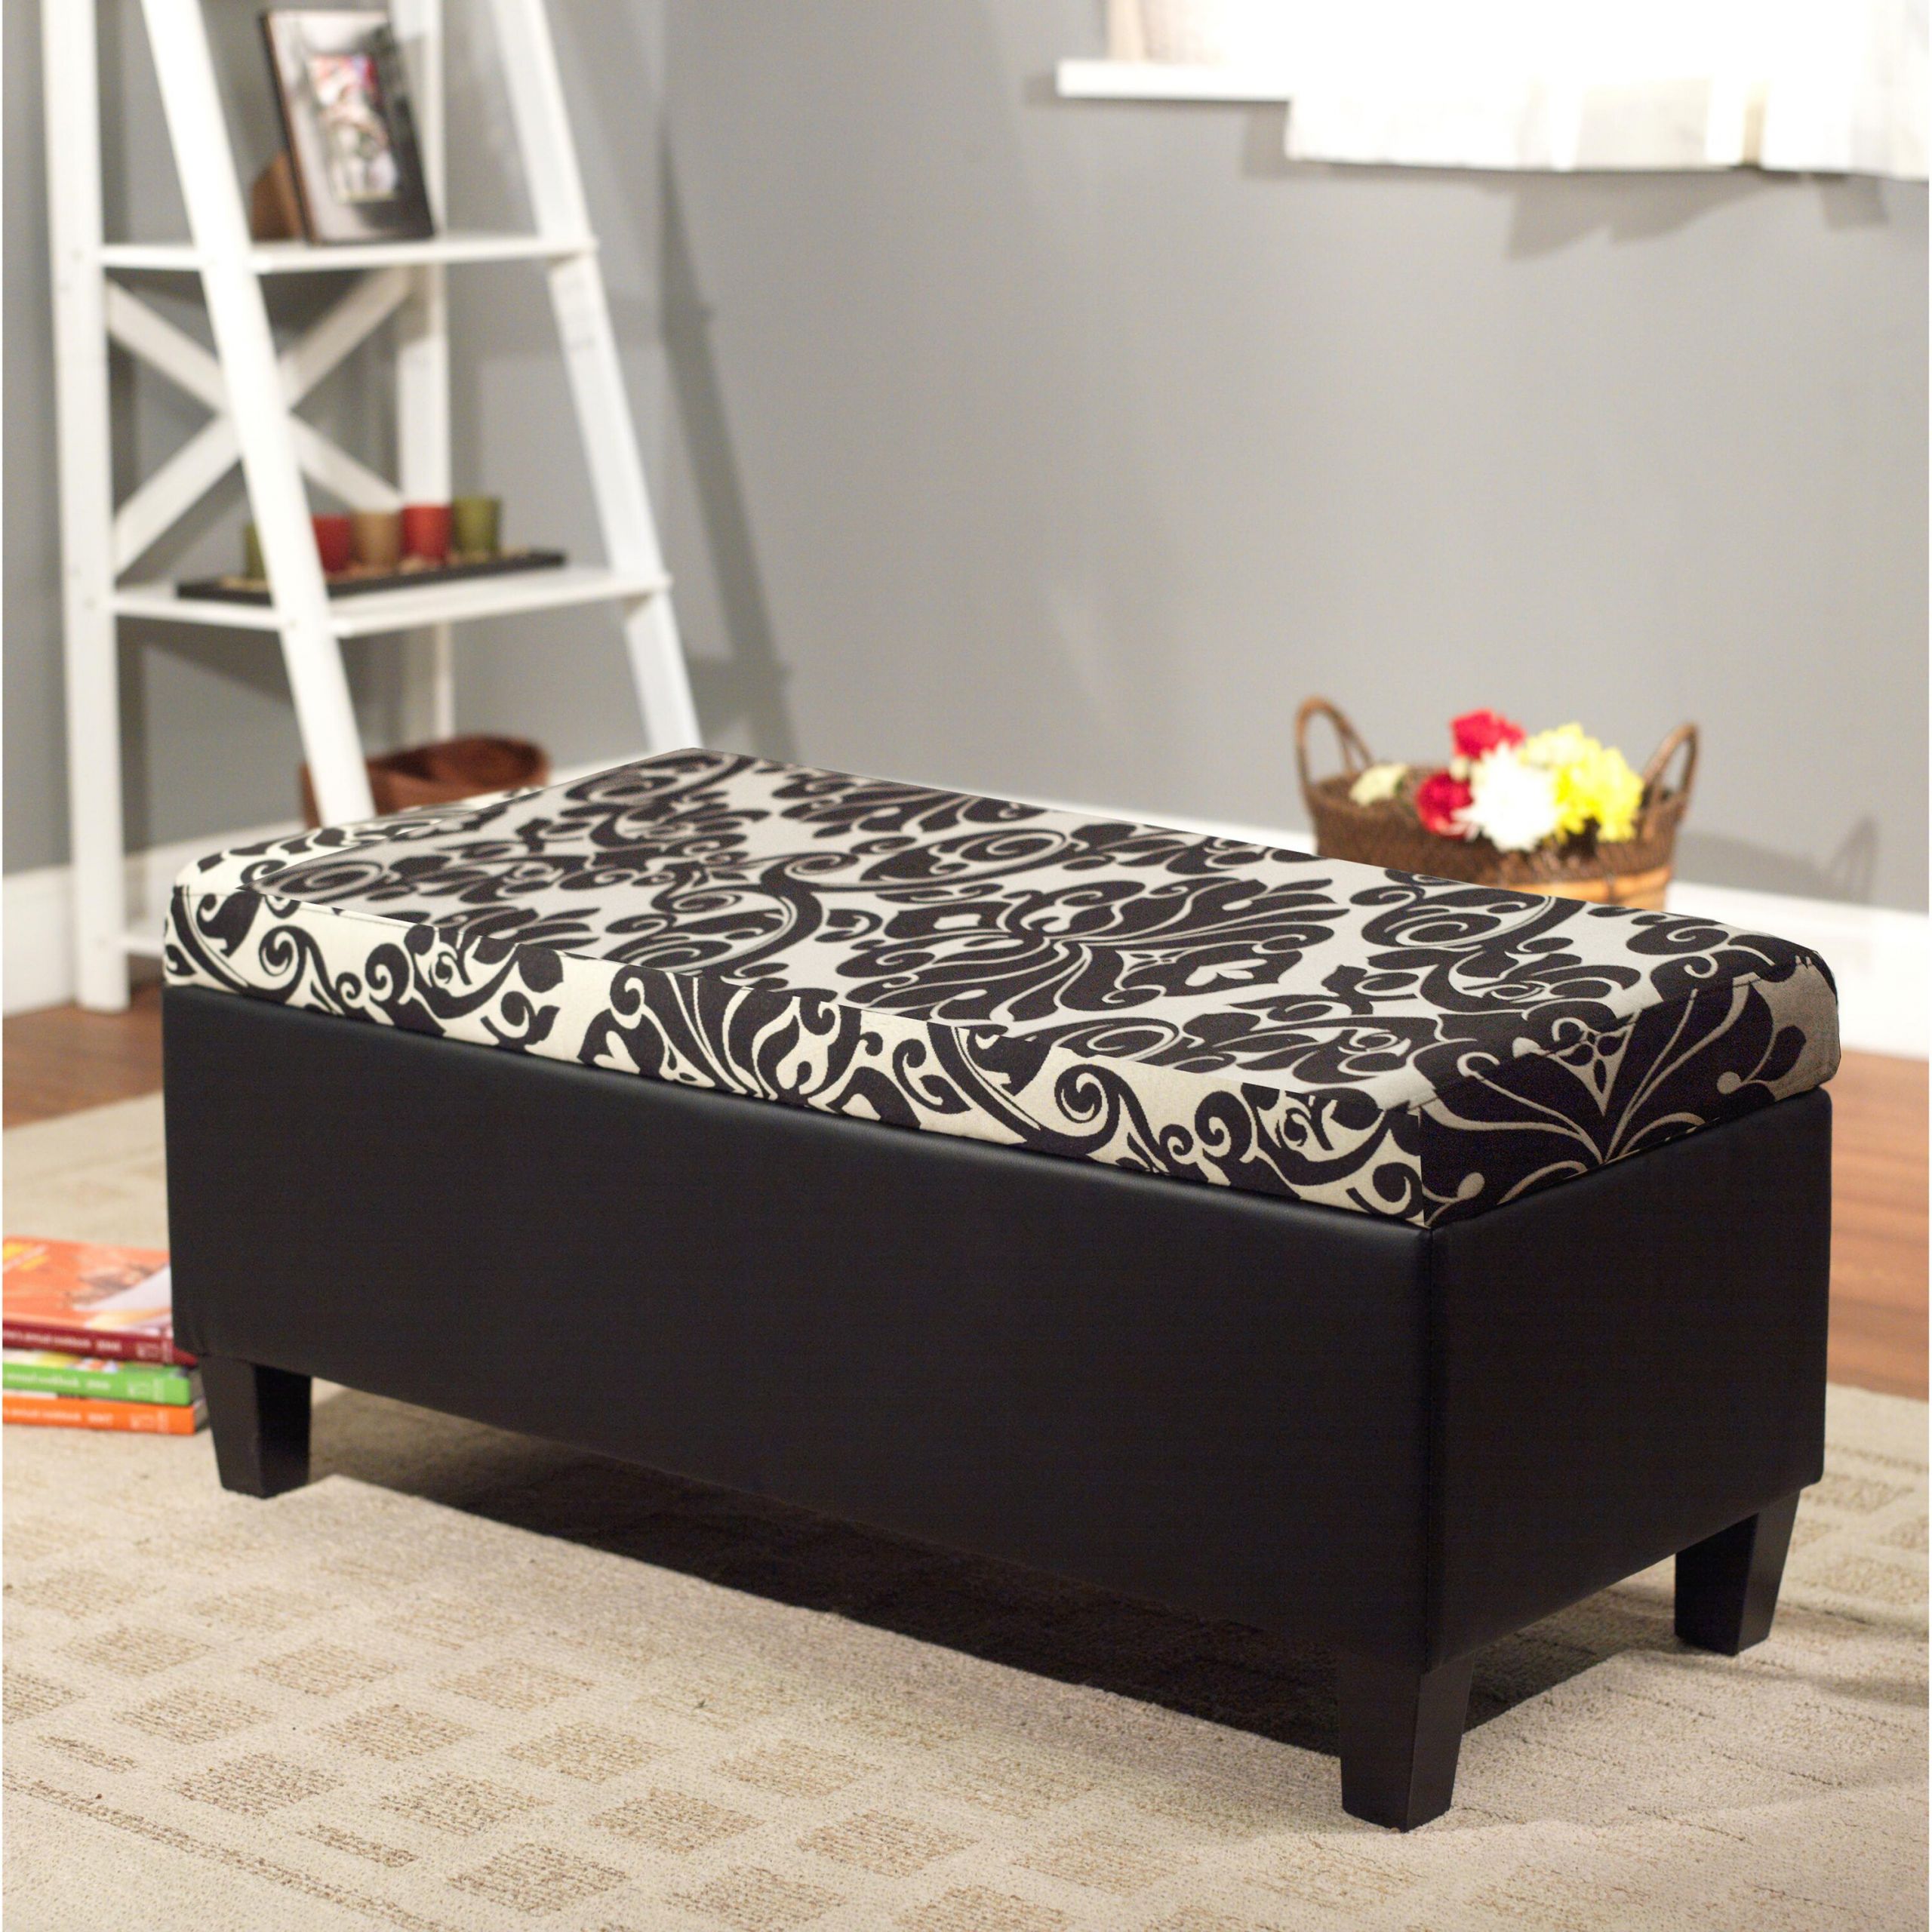 Bench For Bedroom With Storage
 TMS Zoe Storage Bedroom Bench & Reviews